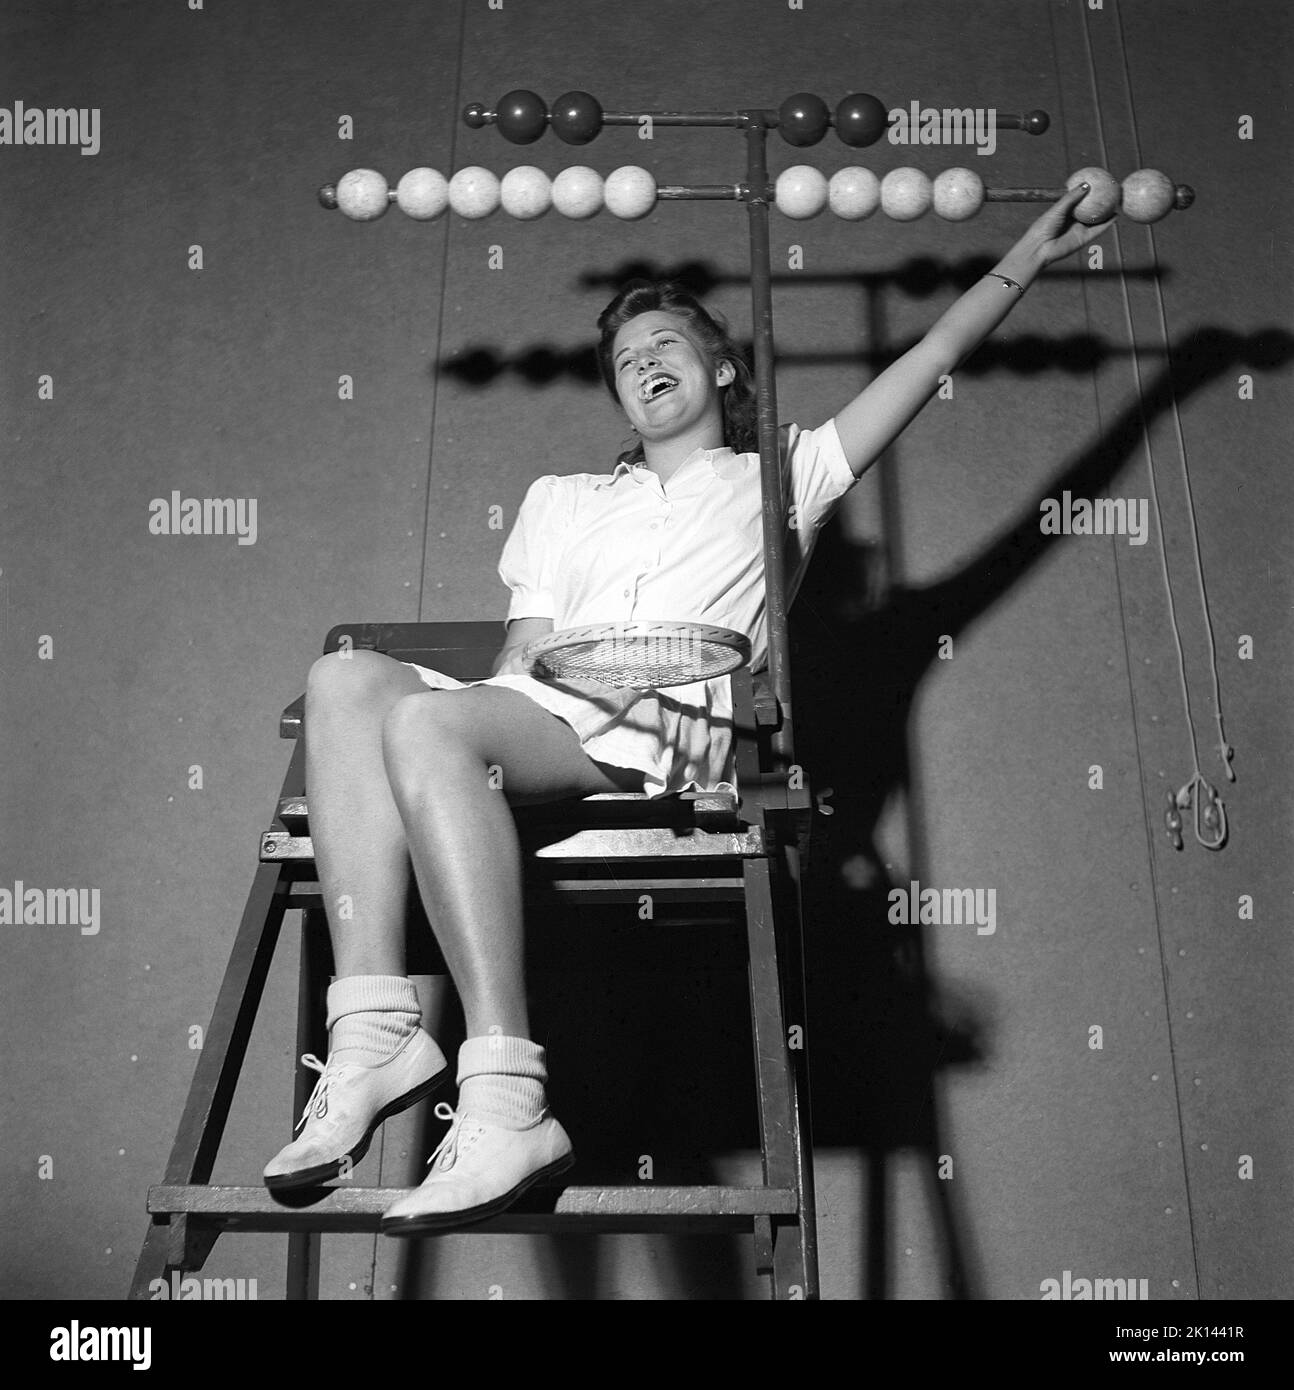 Tennis in the 1940s. A young woman is sitting in the tennis jugdge's chair. The wooden balls in bright and dark on each side are for visually mark won games and sets for each player  Sweden 1942 Kristoffersson ref M92-5 Stock Photo